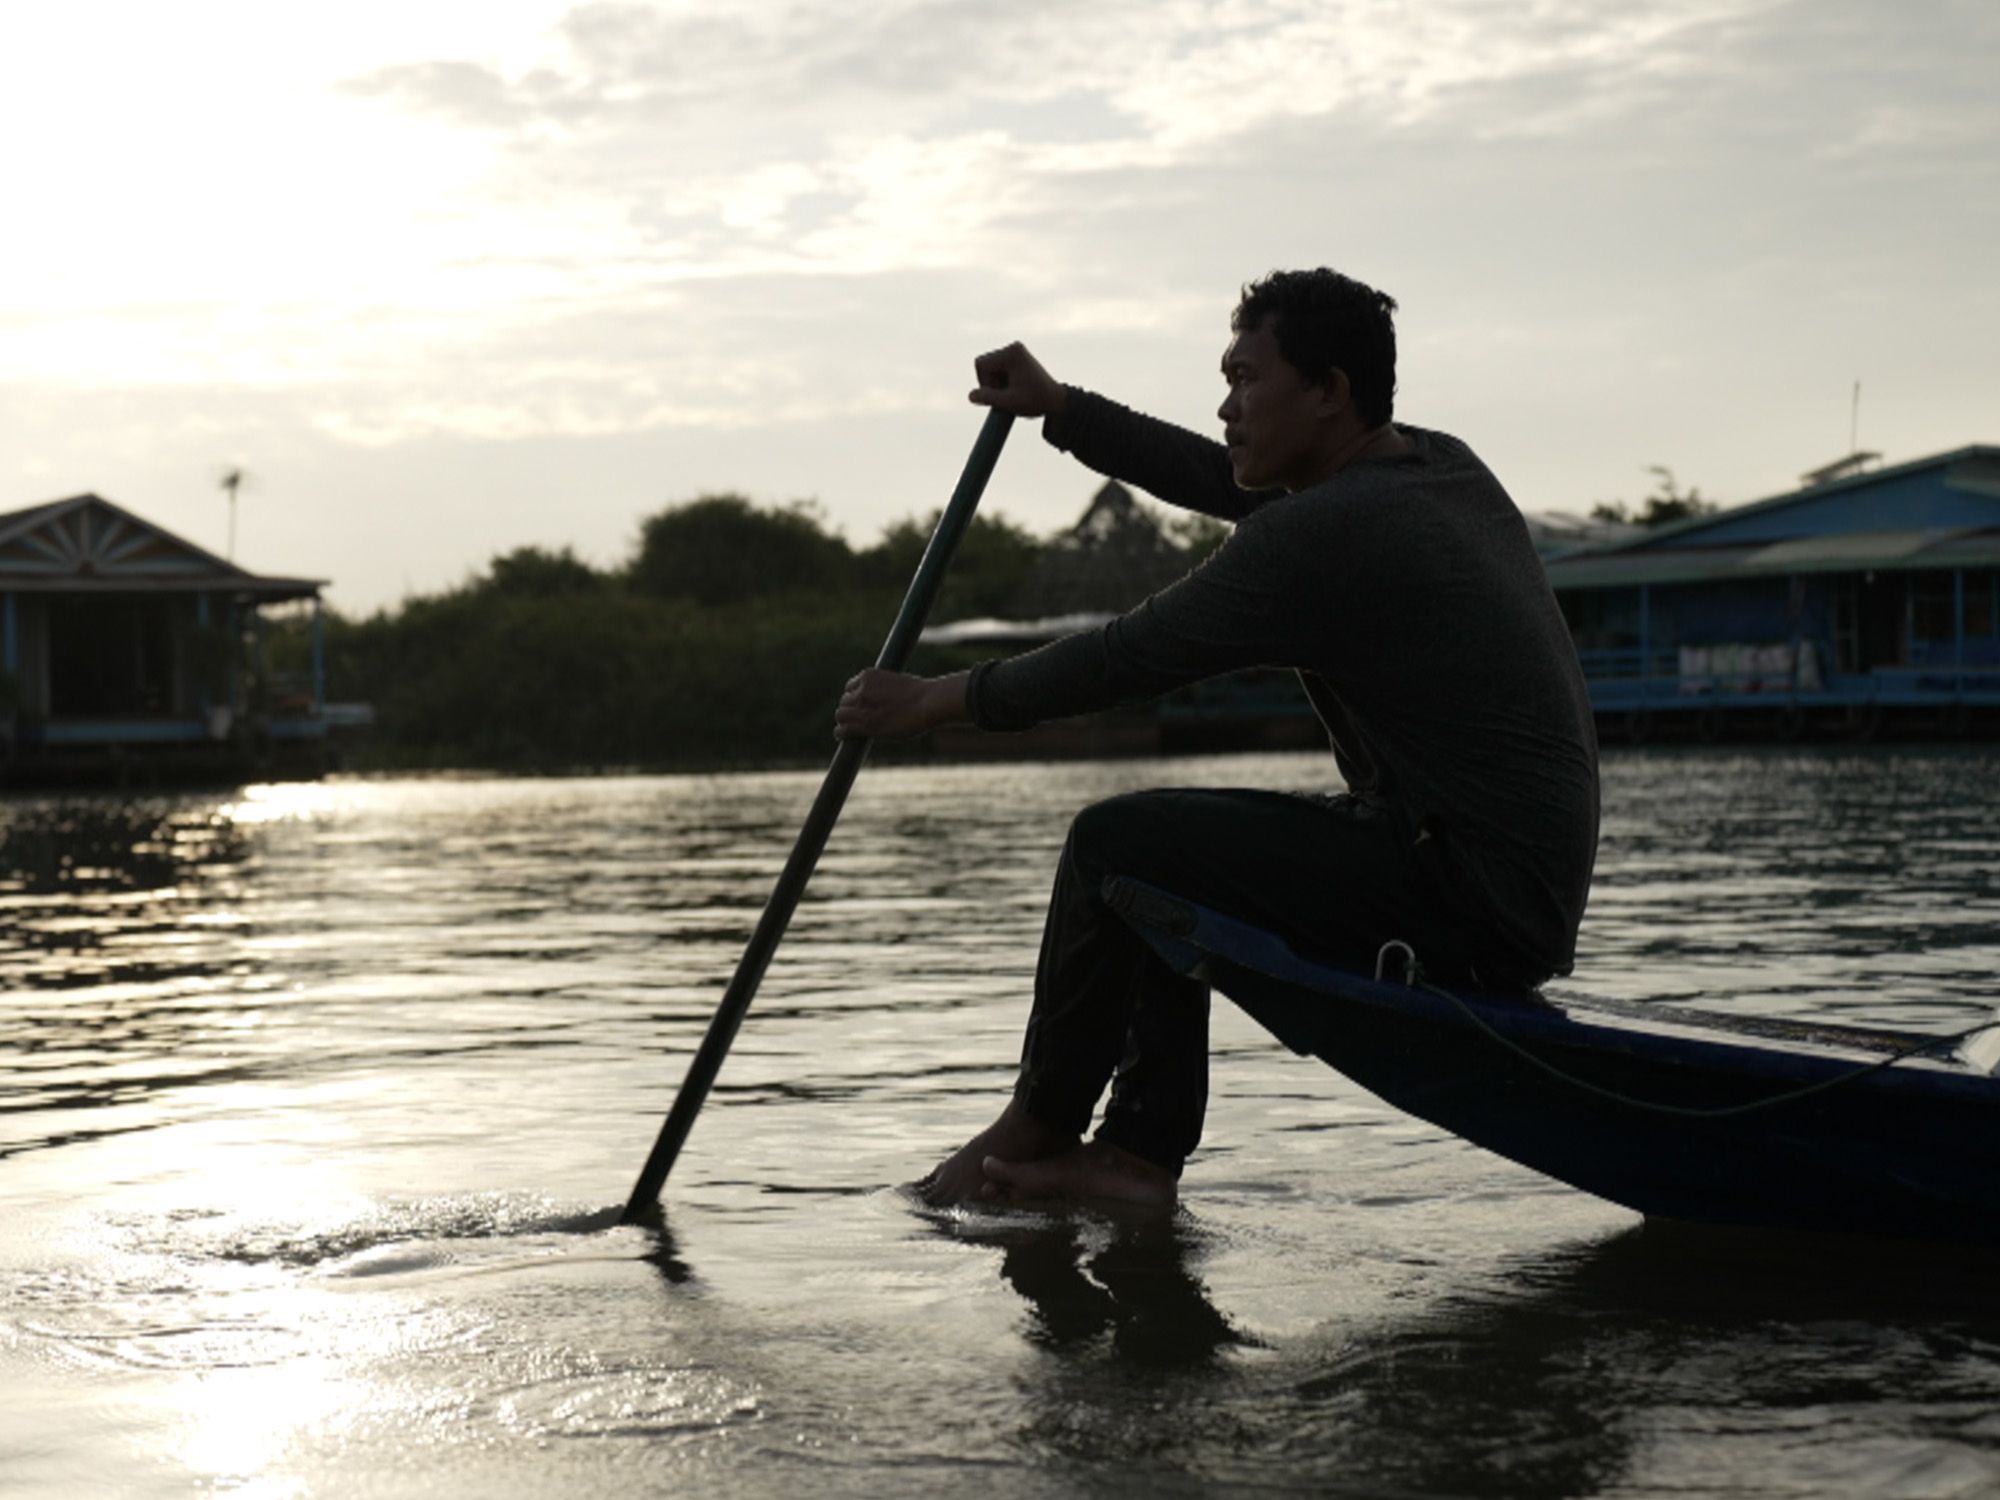 Mekong: The last chance to save a mighty river